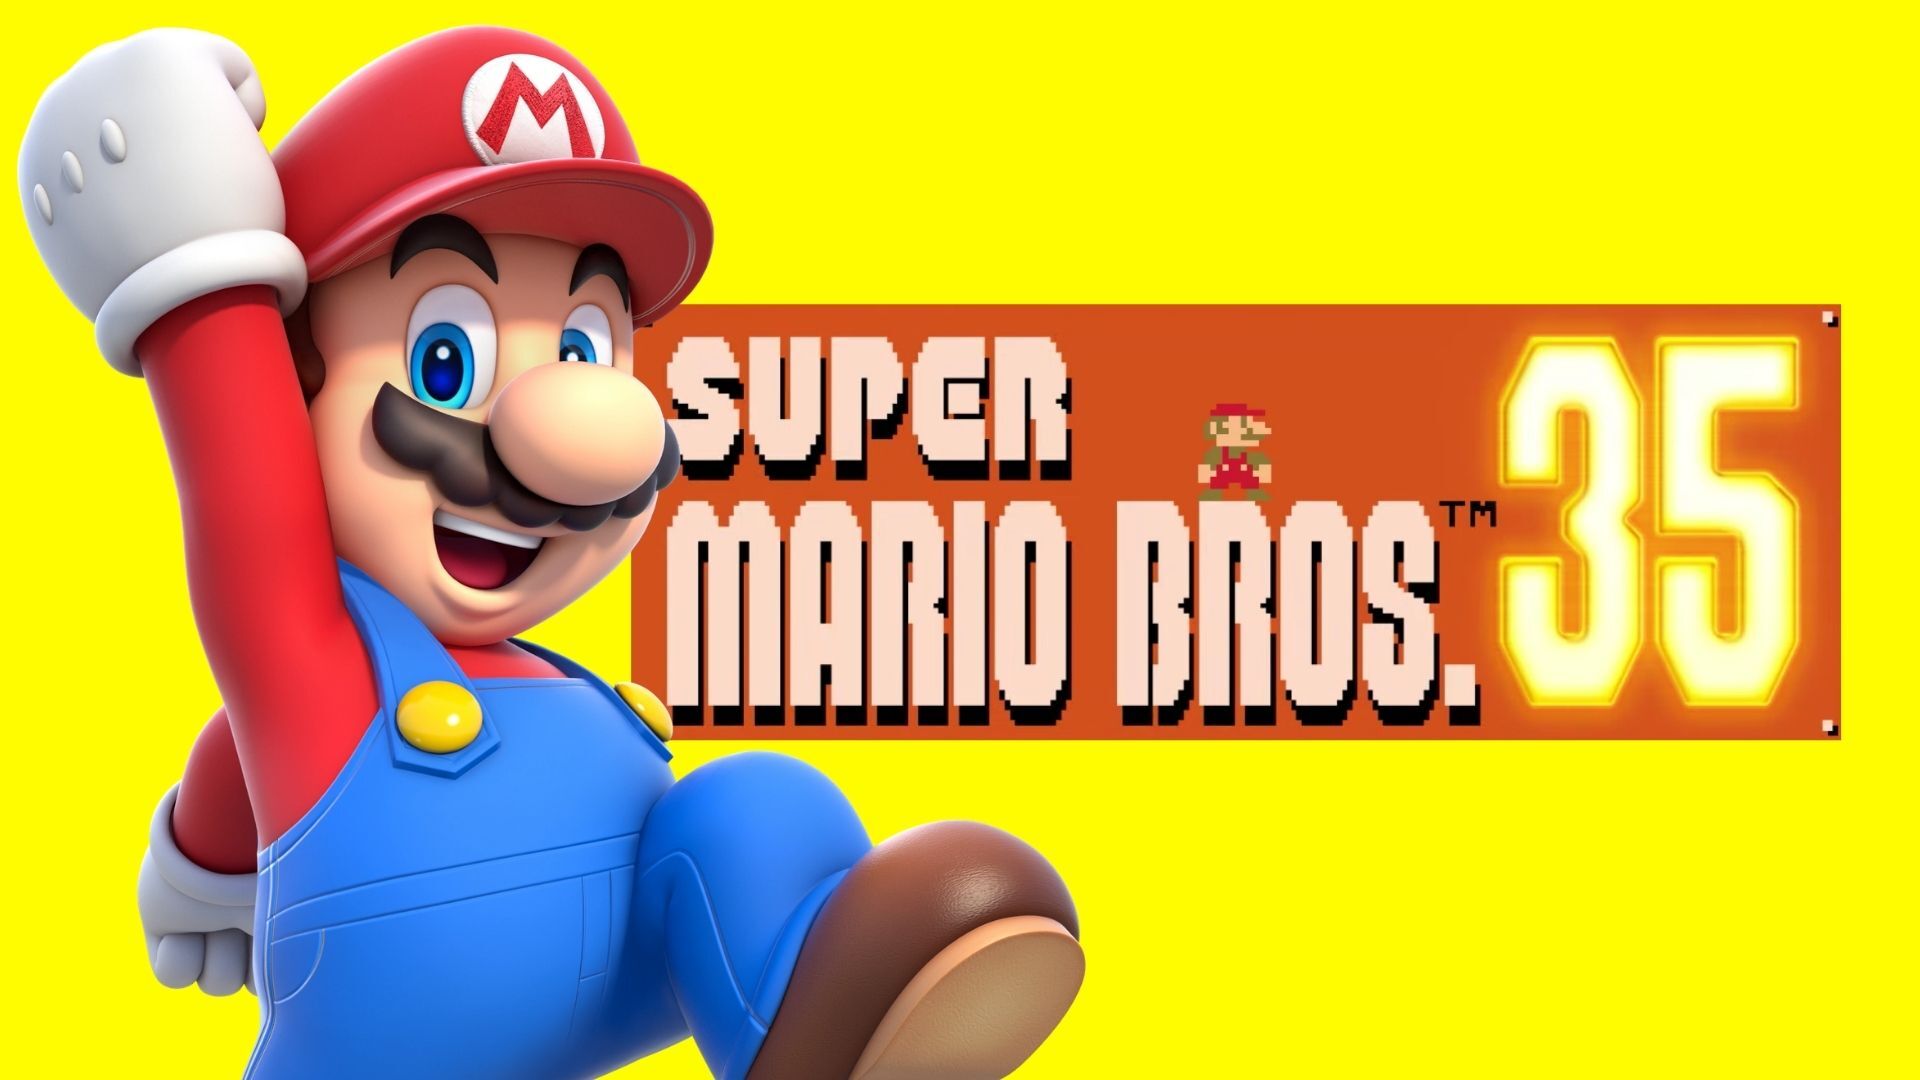 Super Mario Bros. 35 Is A New Nintendo Switch Online Battle Royale